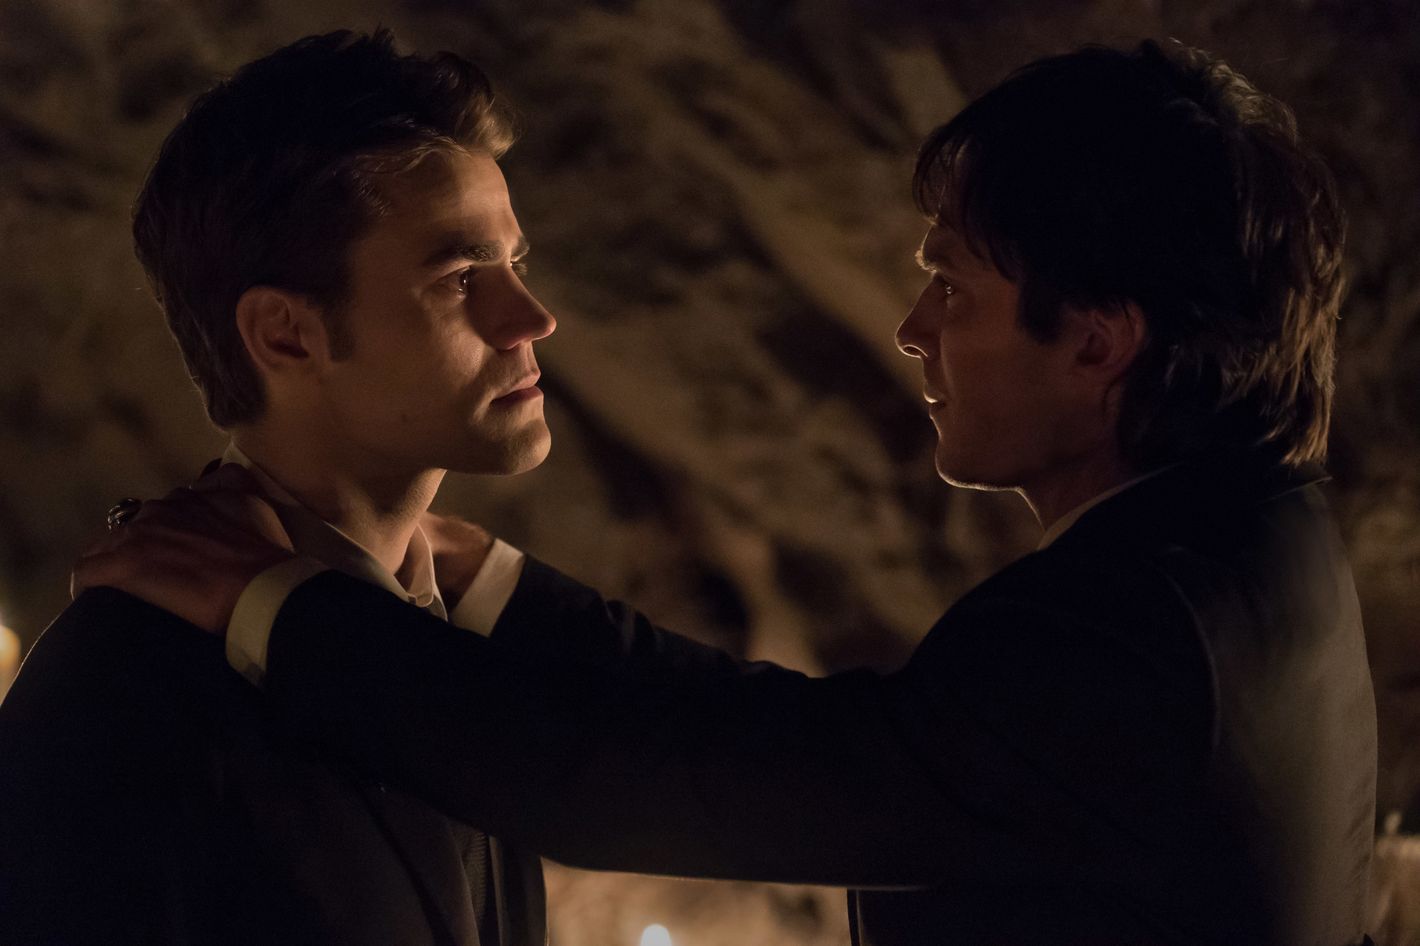 The Vampire Diaries': The 5 Best Episodes According to Fans